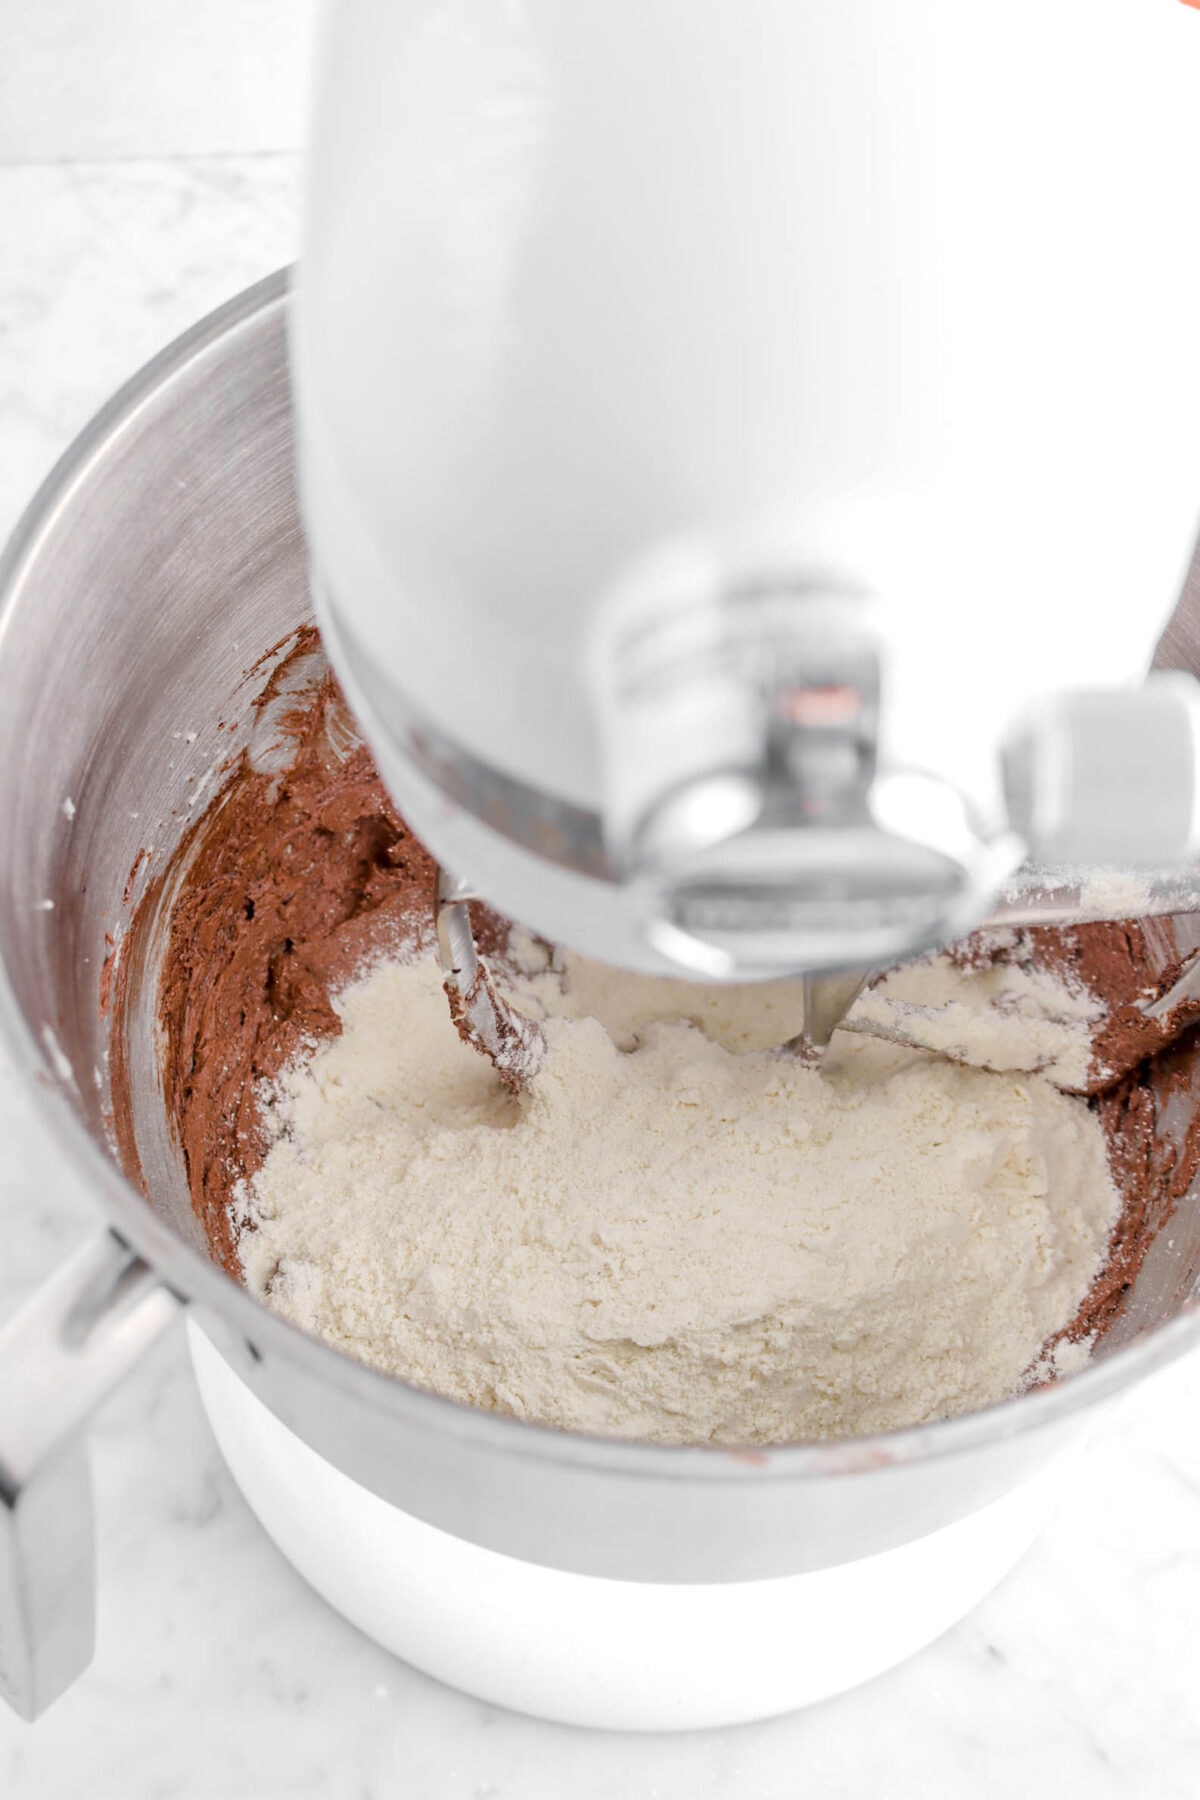 dry ingredients added to chocolate mixture